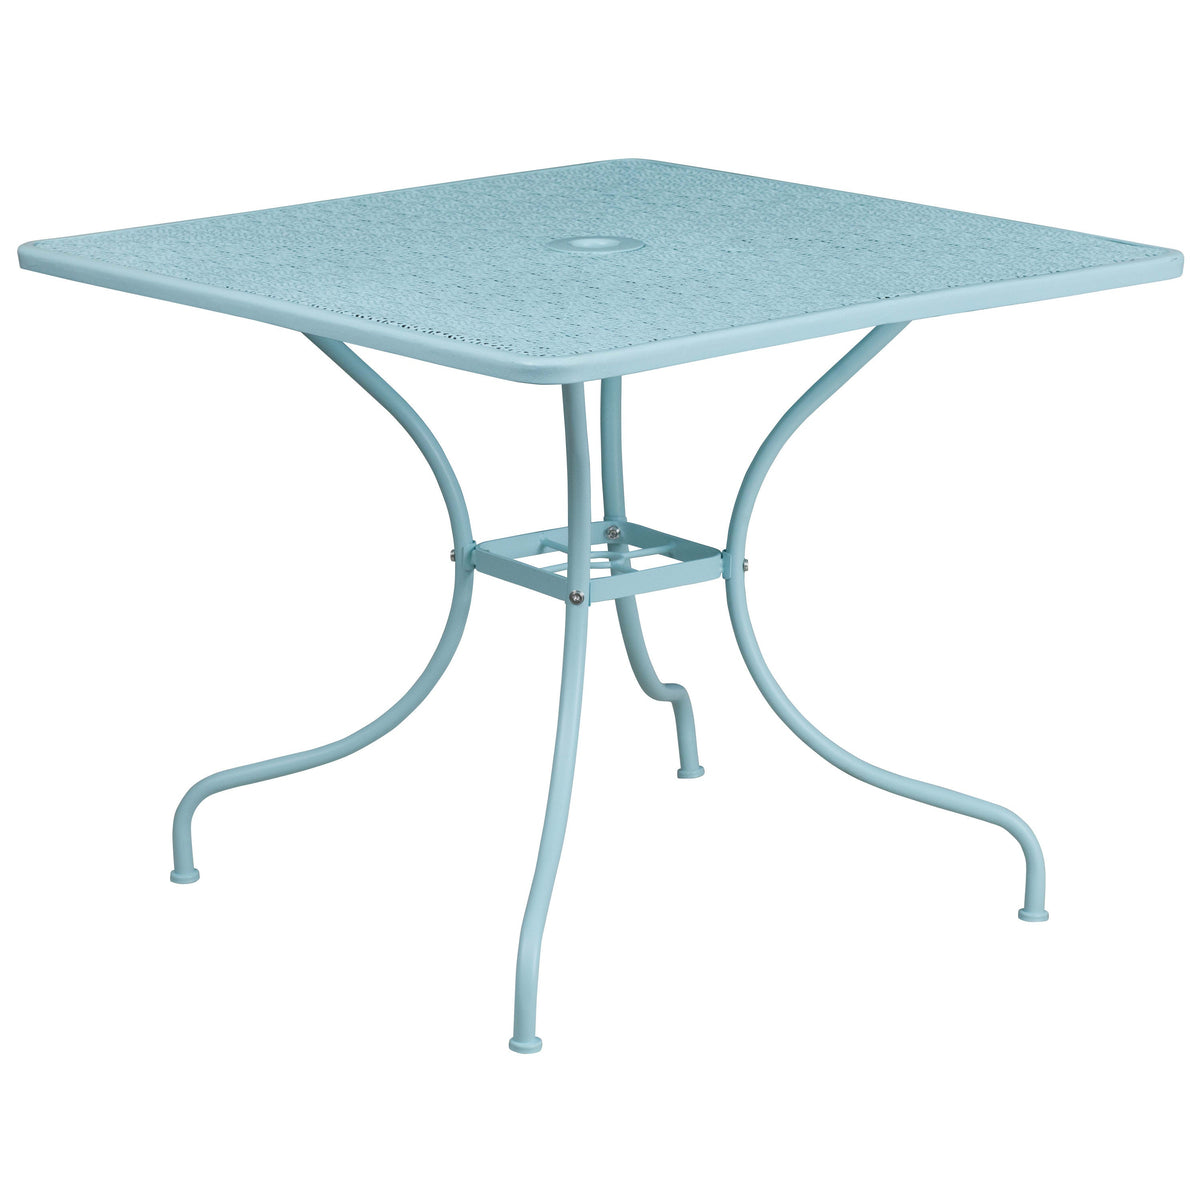 Sky Blue |#| 35.5inch SQ Sky Blue Indoor-Outdoor Steel Patio Table Set w/ 2 Square Back Chairs